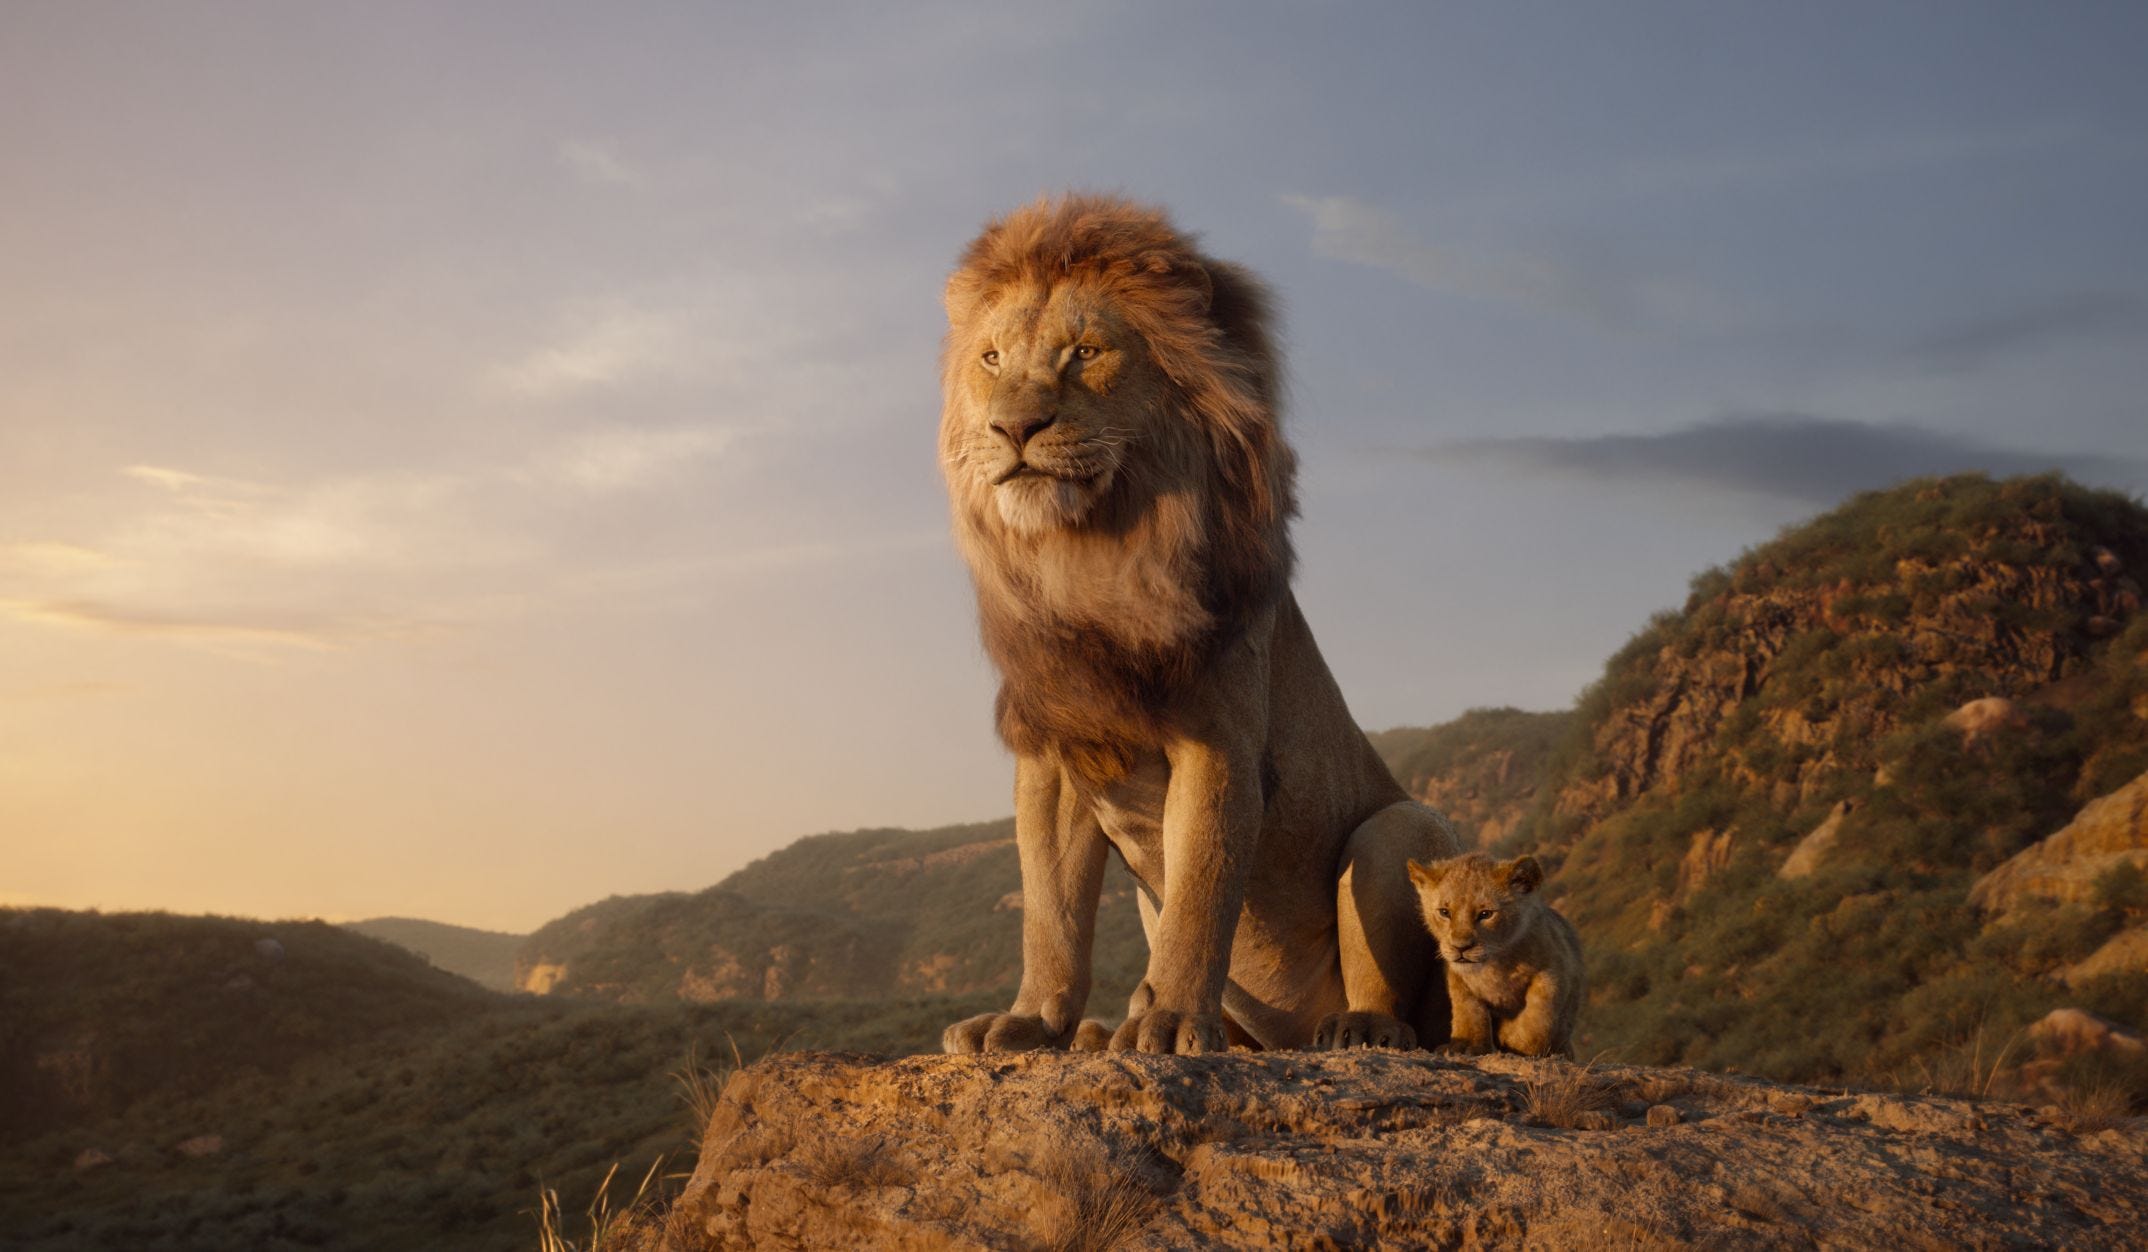 <p>"'Mufasa' is the origin story of one of the greatest kings in the history of pride lions," director Barry Jenkins ("Moonlight") told fans at 2022's D23 Expo, saying that the film will be told in different time frames as it shifts between the present and past.</p><p>Rafiki, Timon, and Pumbaa are all narrating Mufasa's story, which will show how he came into power.</p><p>"Mufasa was actually an orphaned cub who had to navigate the world alone, by himself," Jenkins said of the prequel. "In telling this story, we get to experience the real journey of how Mufasa found his place in the Circle of Life."</p><p>You can <a href="https://www.insider.com/mufasa-the-lion-king-prequel-info-2022-9">read more on the prequel here</a>.</p>